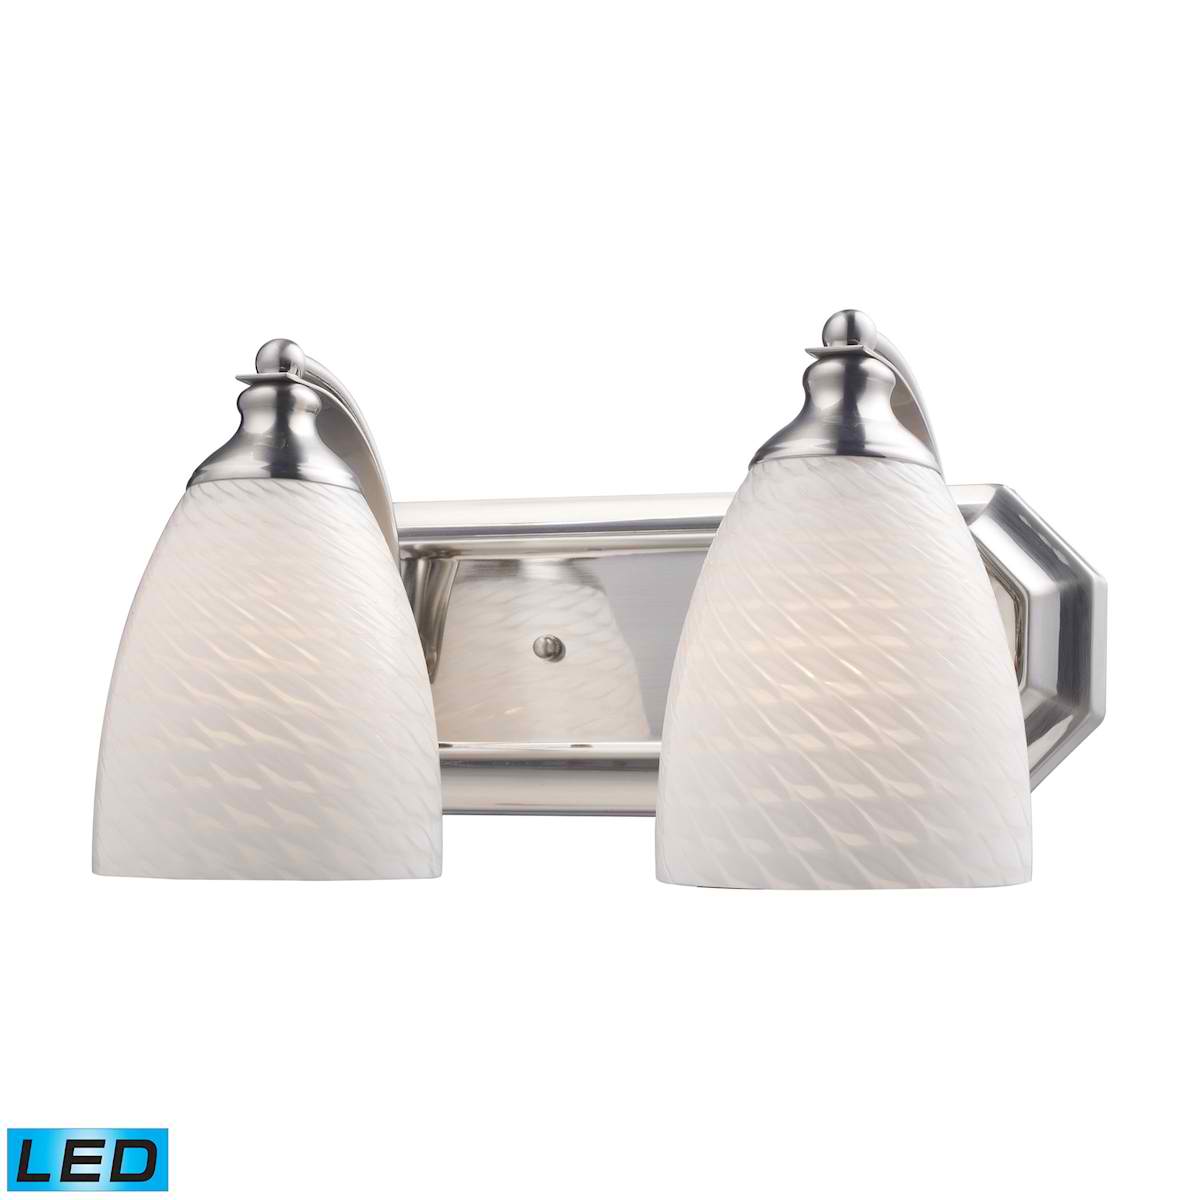 2 Light Vanity in Satin Nickel and White Swirl Glass - LED, 800 Lumens (1600 Lumens Total) with Full Scale